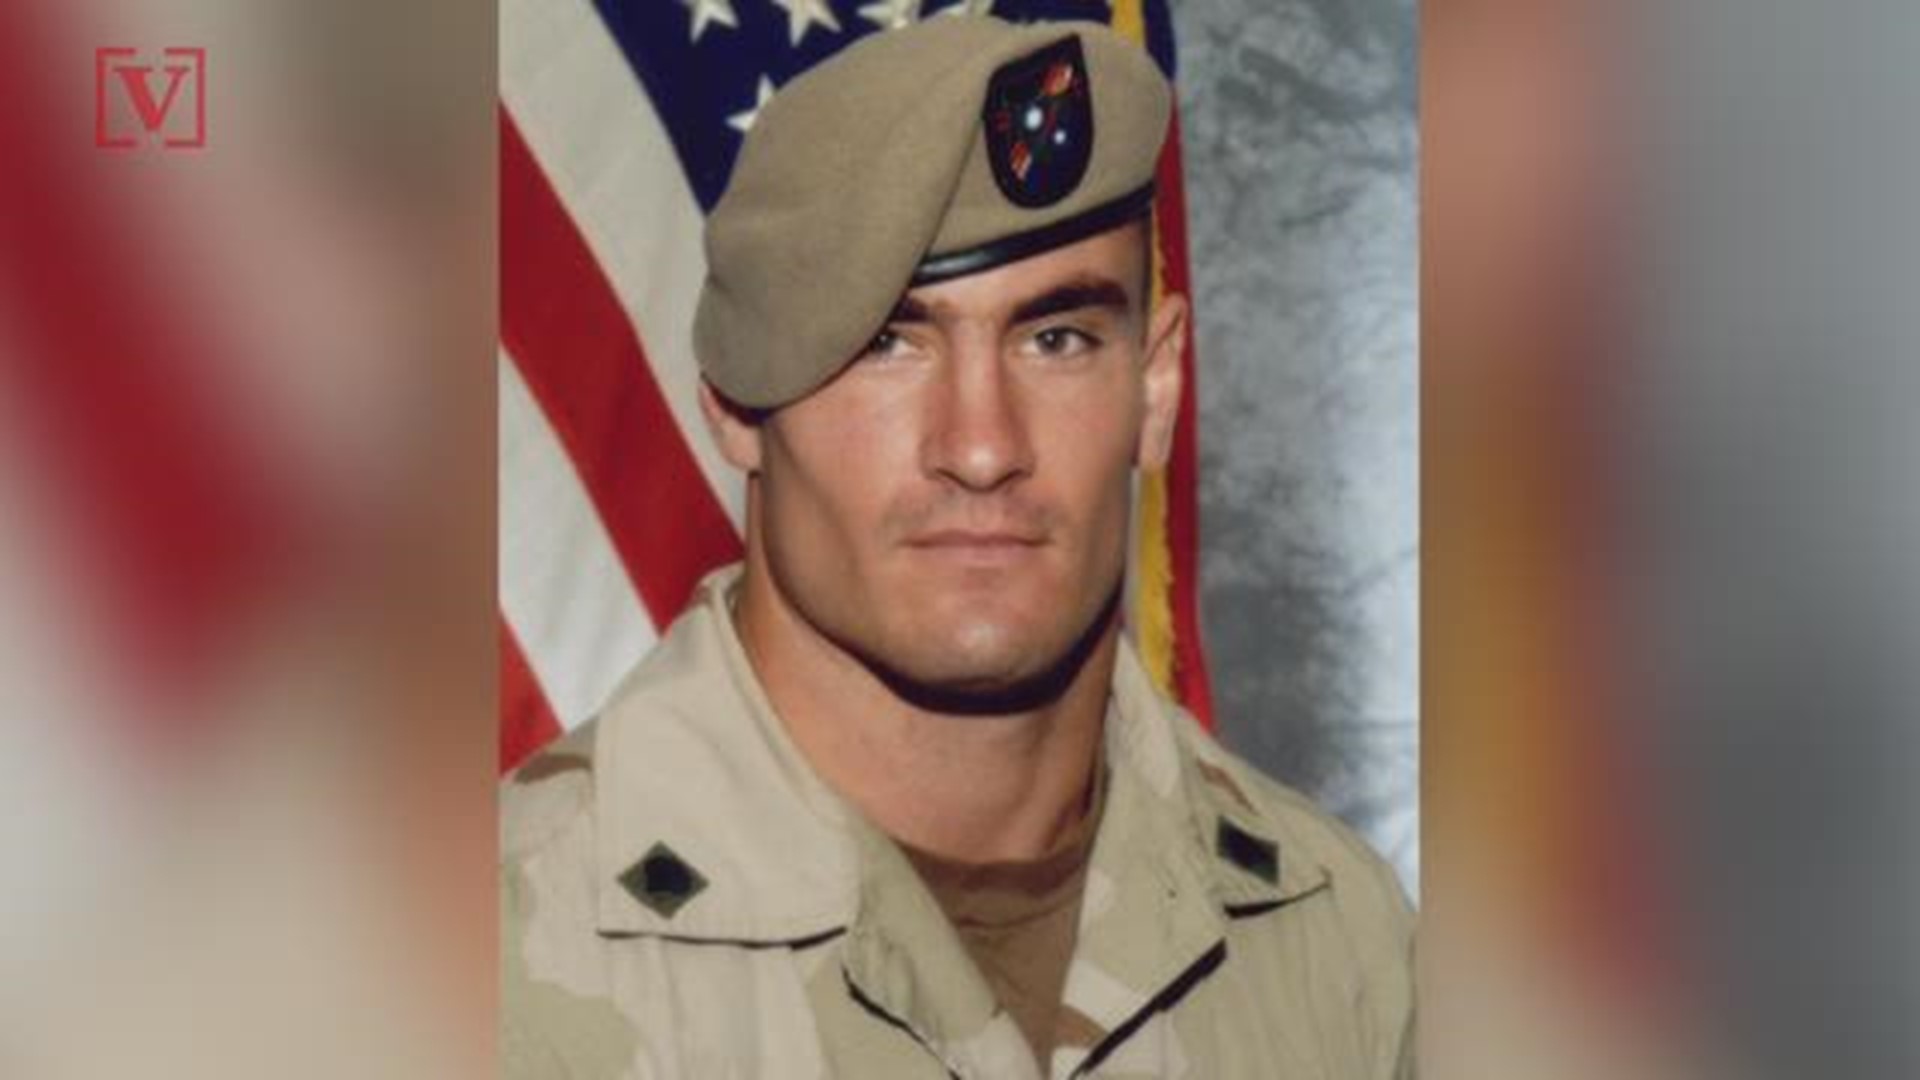 Former NFL Player and Army Ranger Pat Tillman is on the political forefront once again following Nike's unveiling of Colin Kaepernick as the face of their 30th anniversary campaign. Veuer's Natasha Abellard has the story.